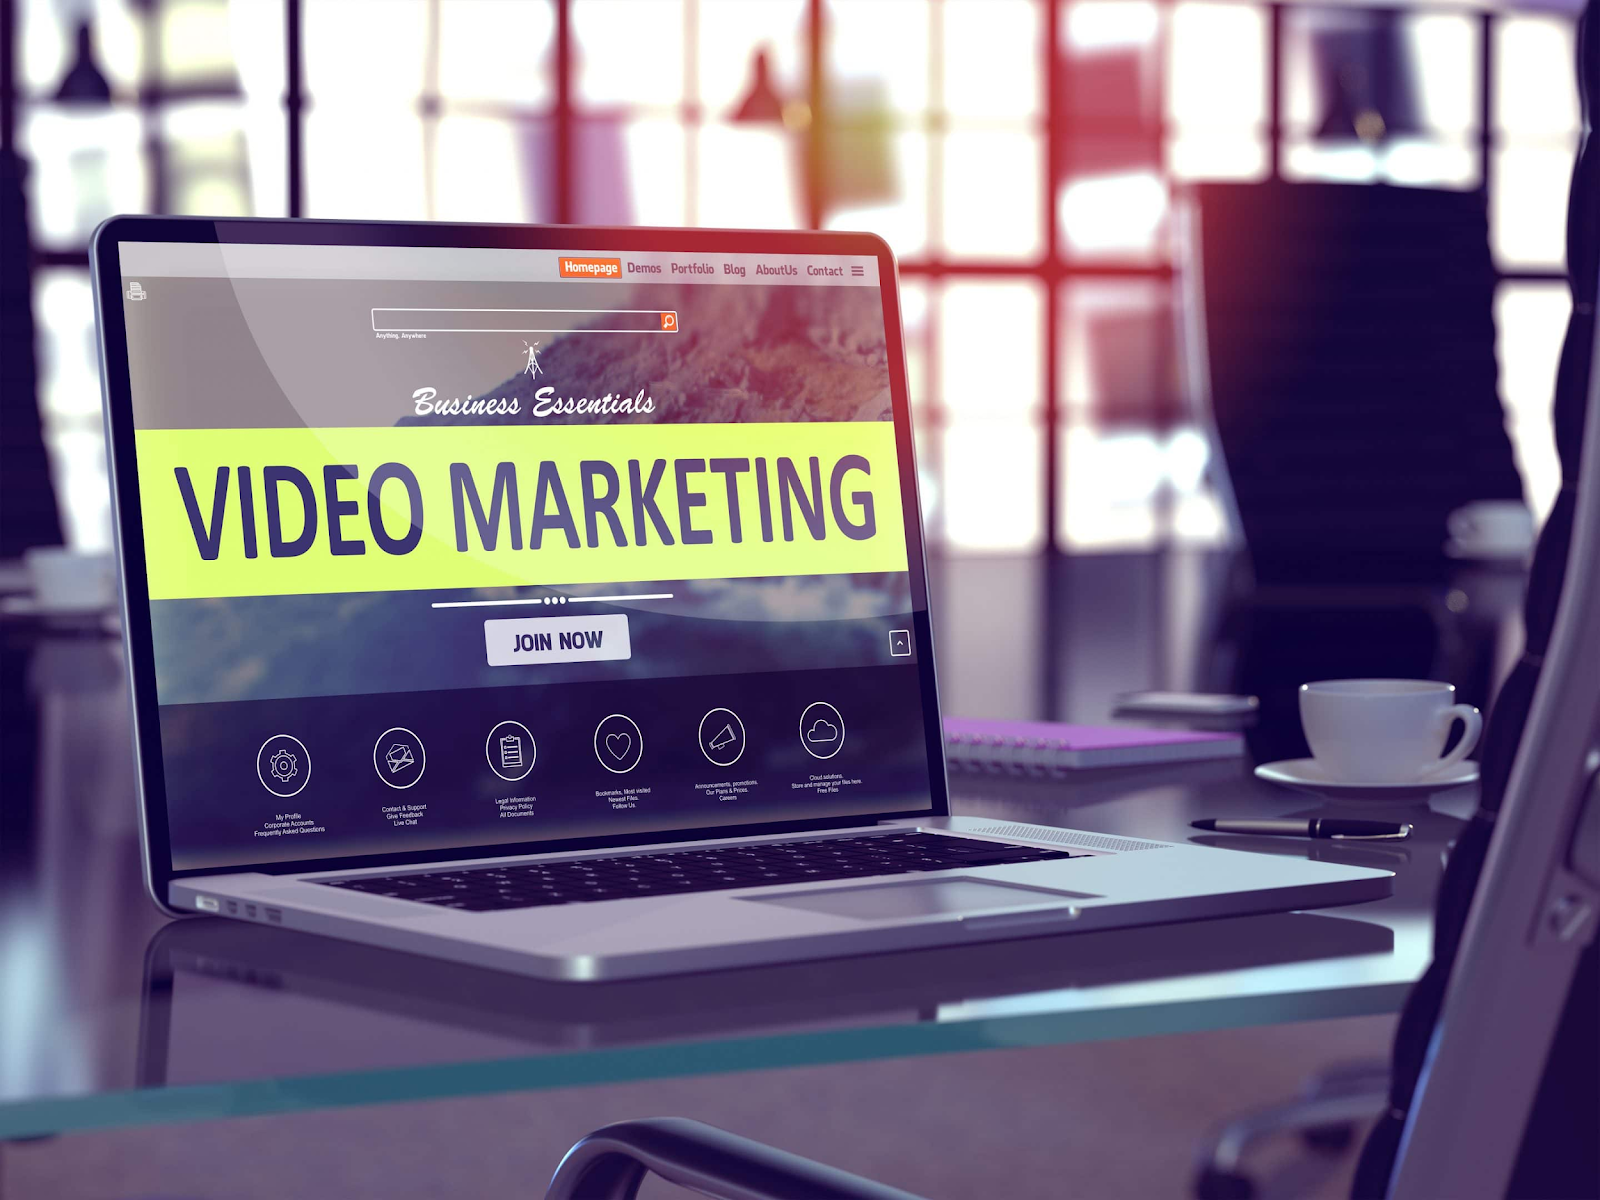 Boost Your Traffic and Conversions By 200% With Video Marketing